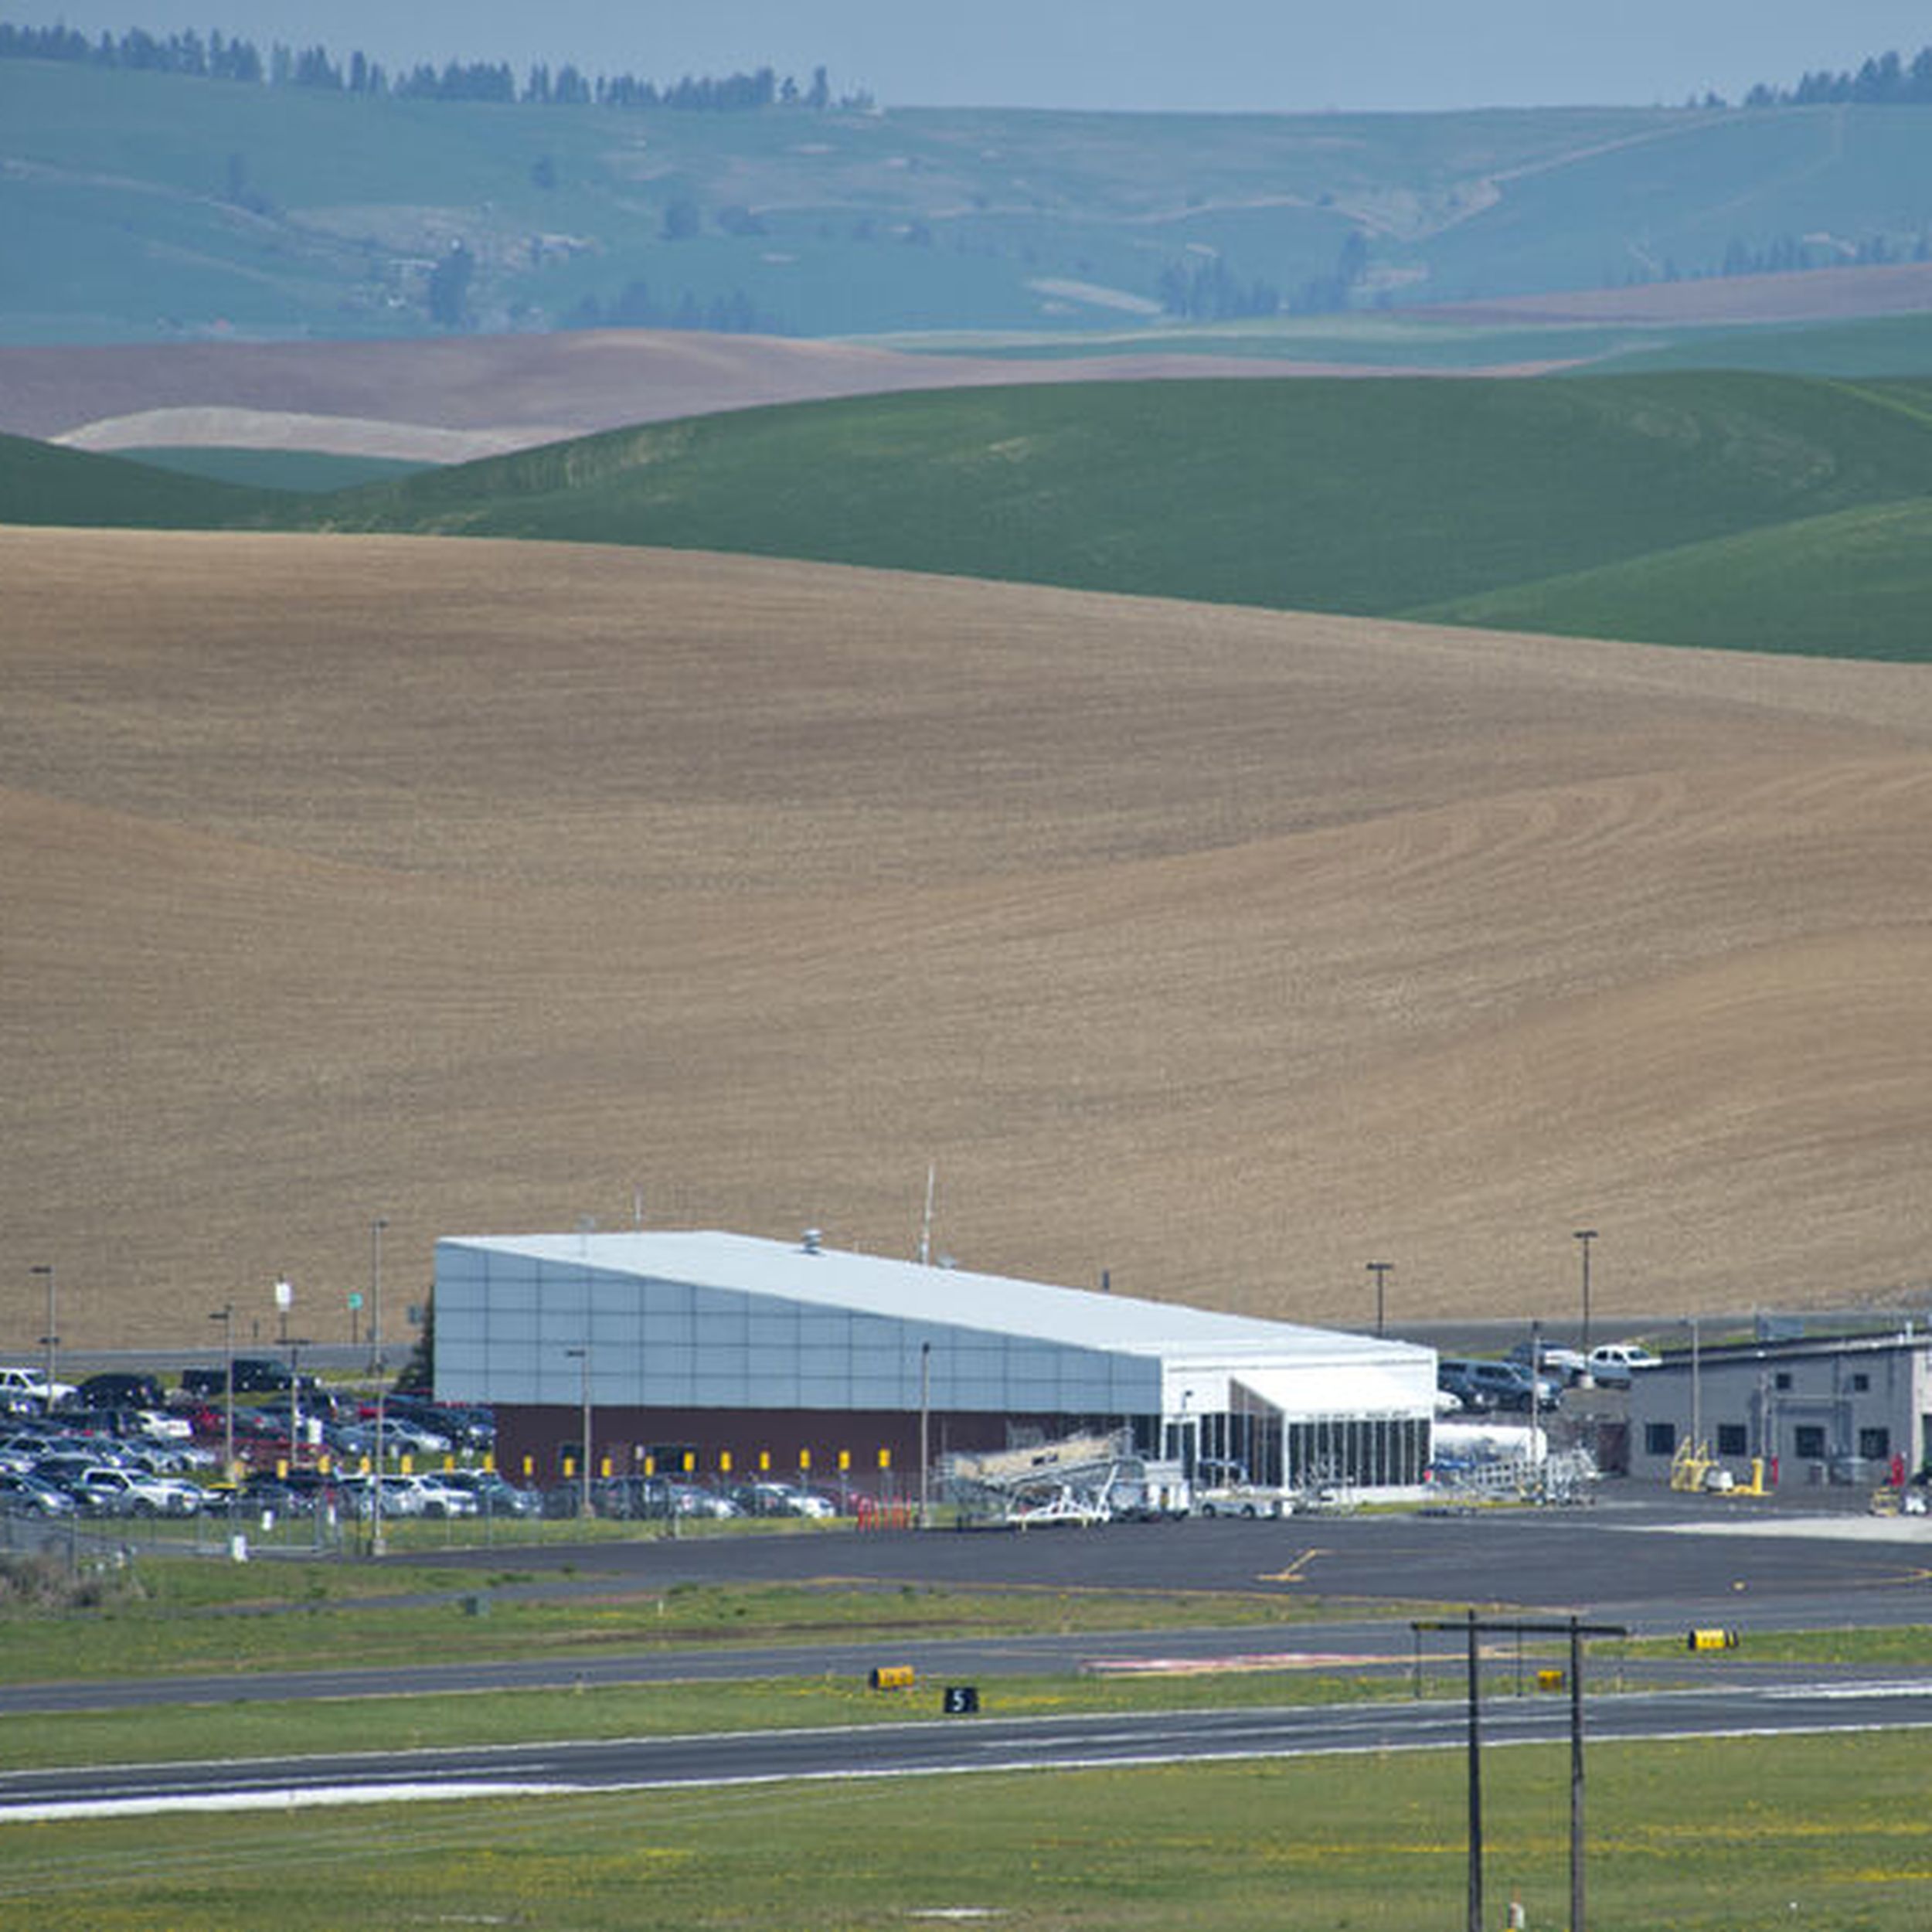 Pullman Moscow Regional Airport Awarded Federal Grant The Spokesman Review